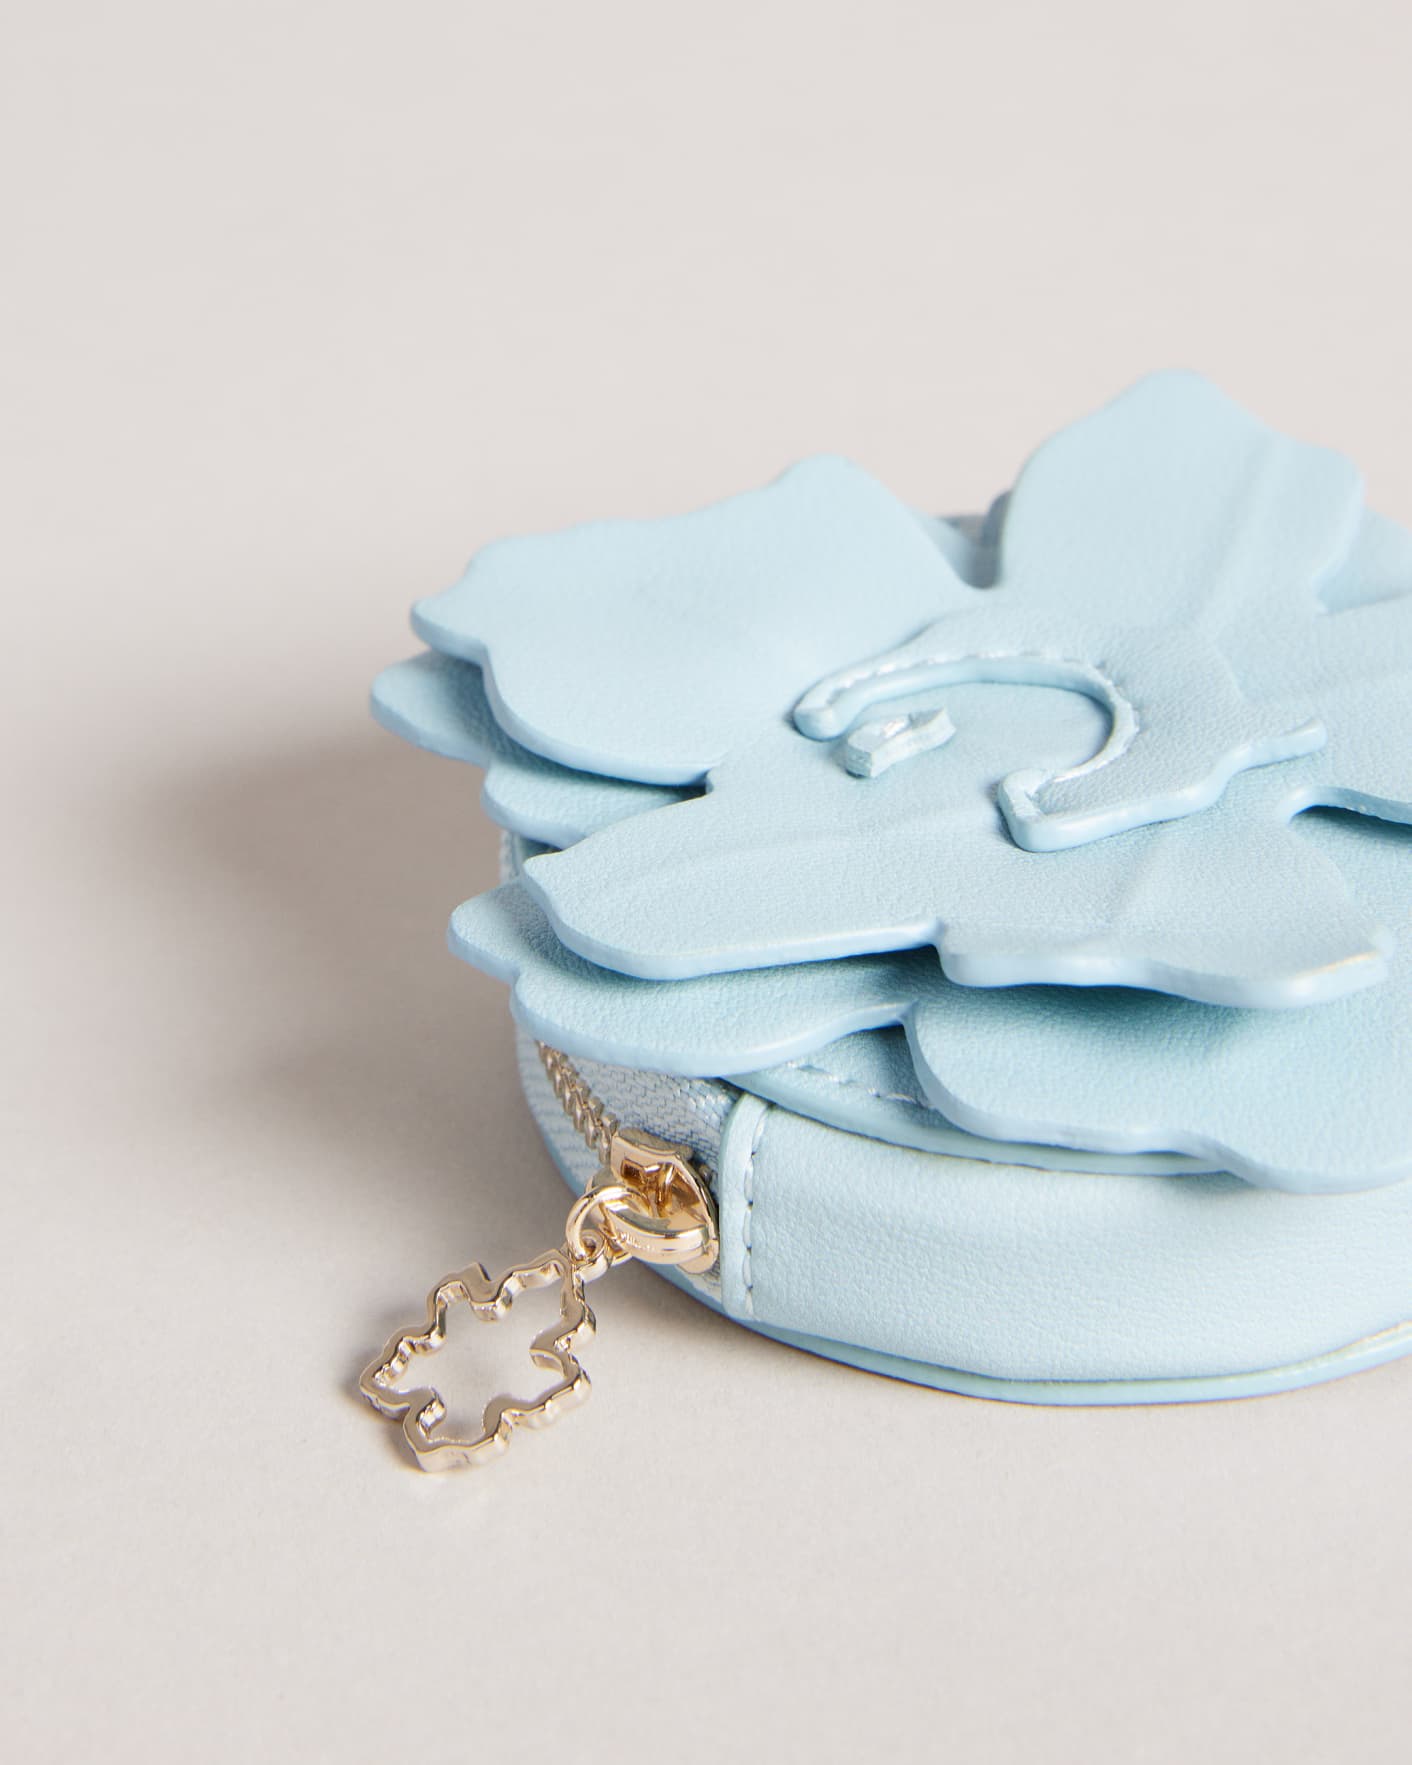 Pale Blue Floral Magnolia Coin Purse Ted Baker